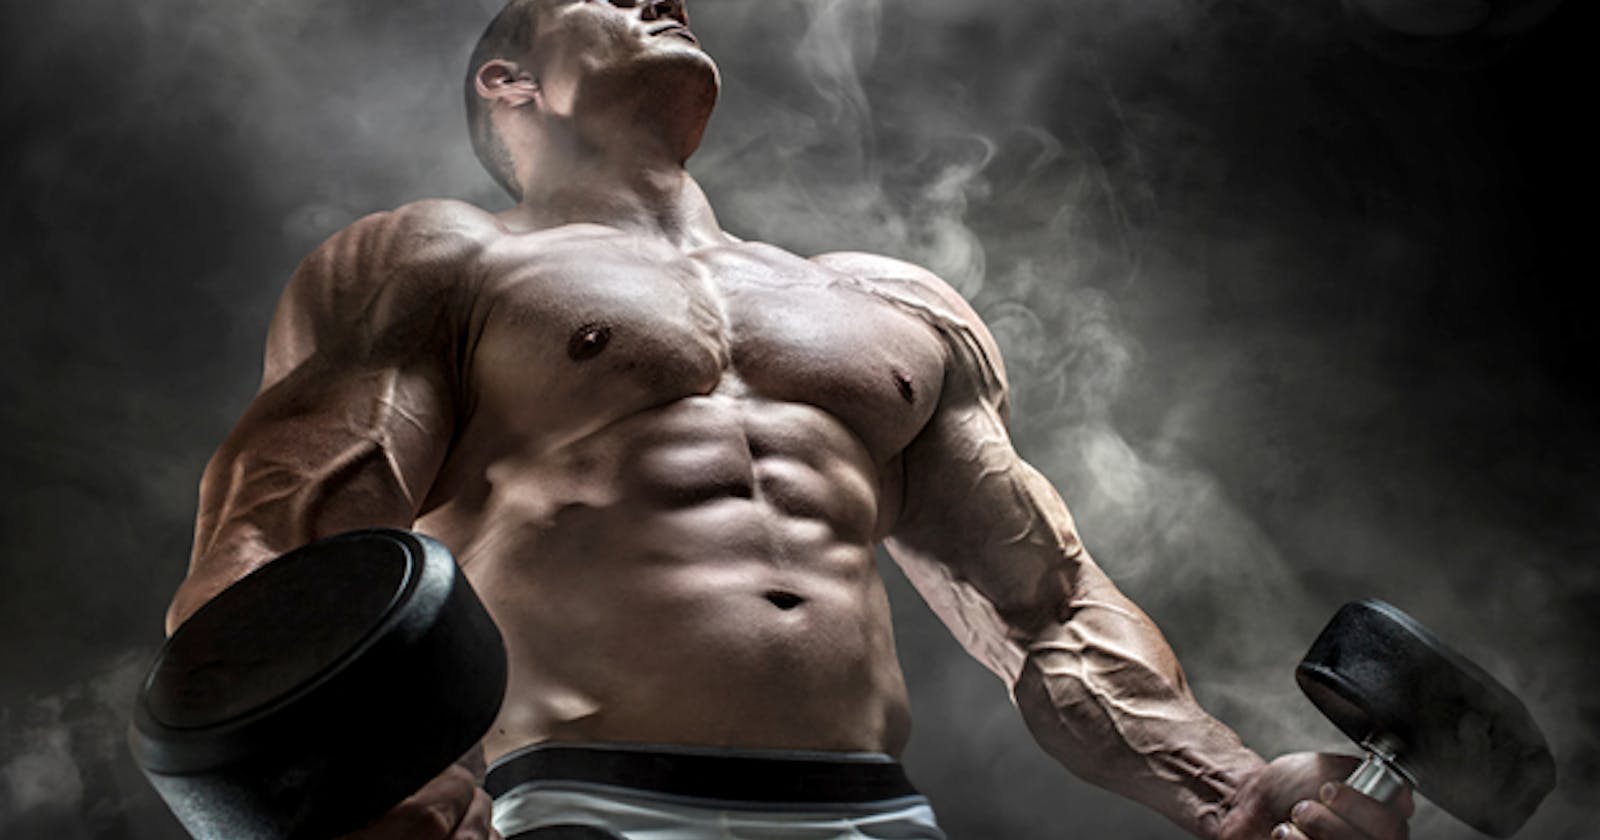 Anavar Steroid Reviews - Does It Real work or not Anavar Steroids Results before and after?